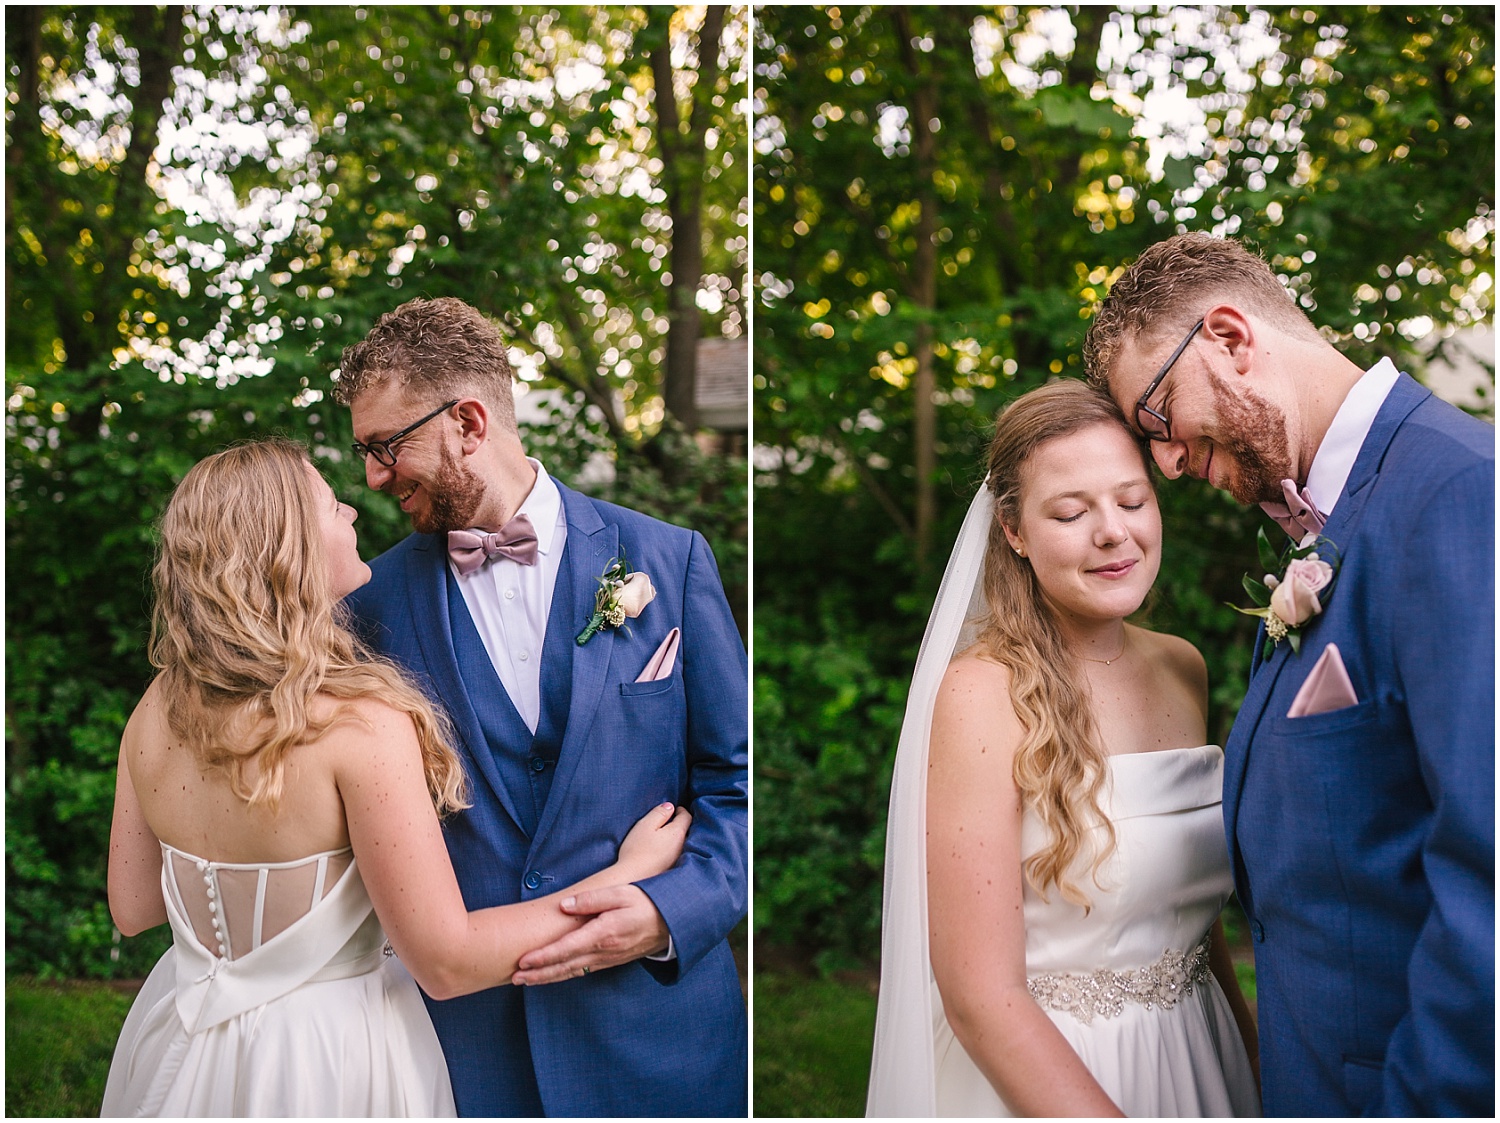 Bride and groom embrace after their intimate backyard wedding ceremony